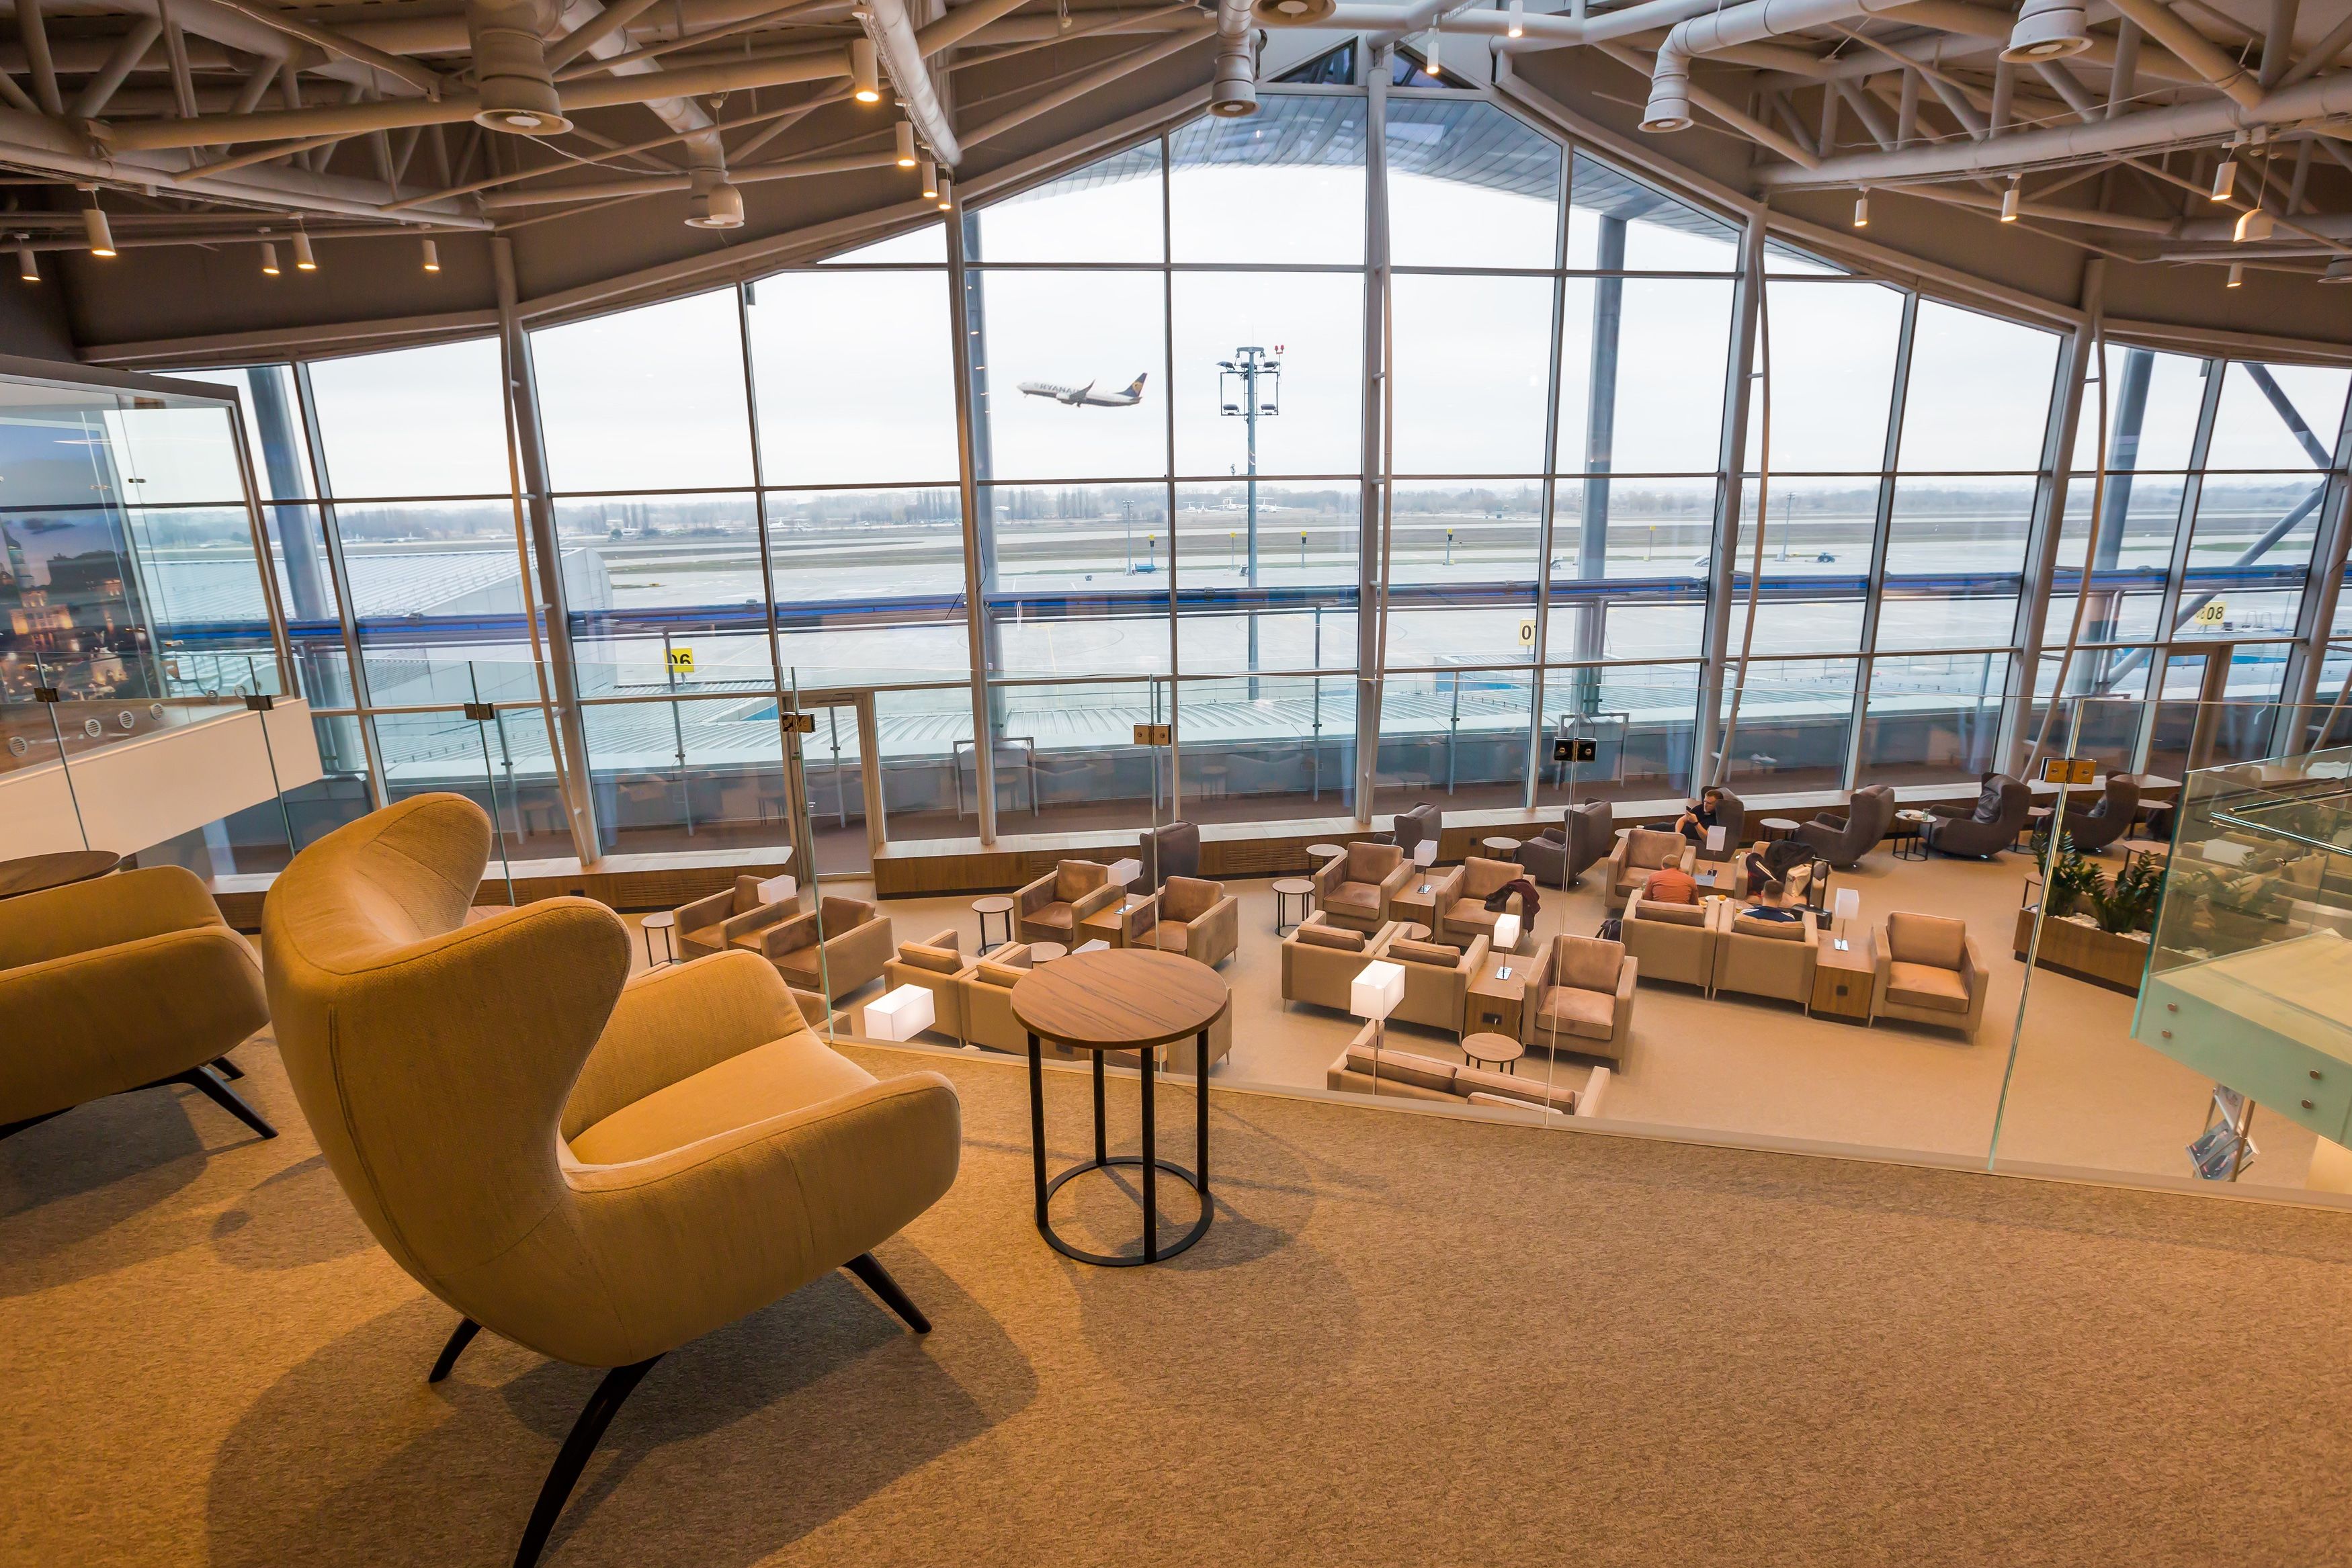 Inside a large airport lounge with incredible airport apron views.